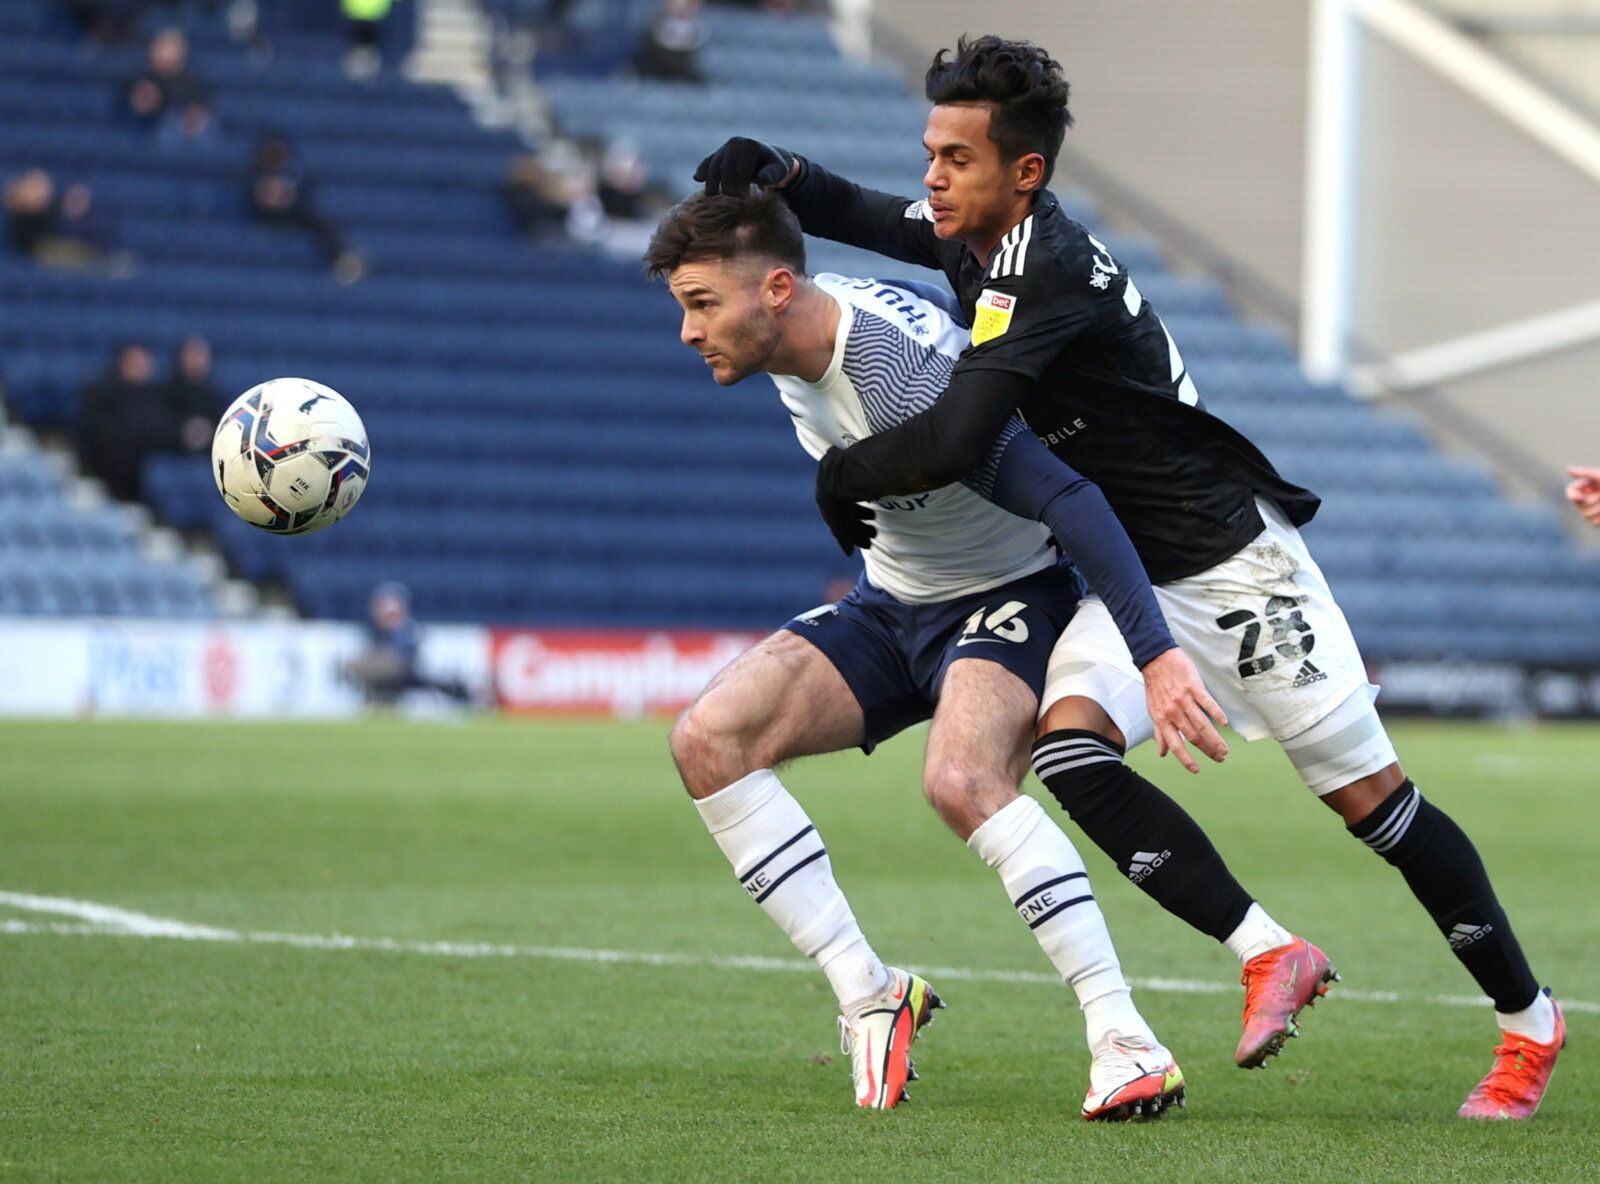 Soccer Football - Championship - Preston North End v Fulham - Deepdale, Preston, Britain - November 27, 2021 Preston North End's Andrew Hughes in action with Fulham's Fabio Carvalho Action Images/Molly Darlington